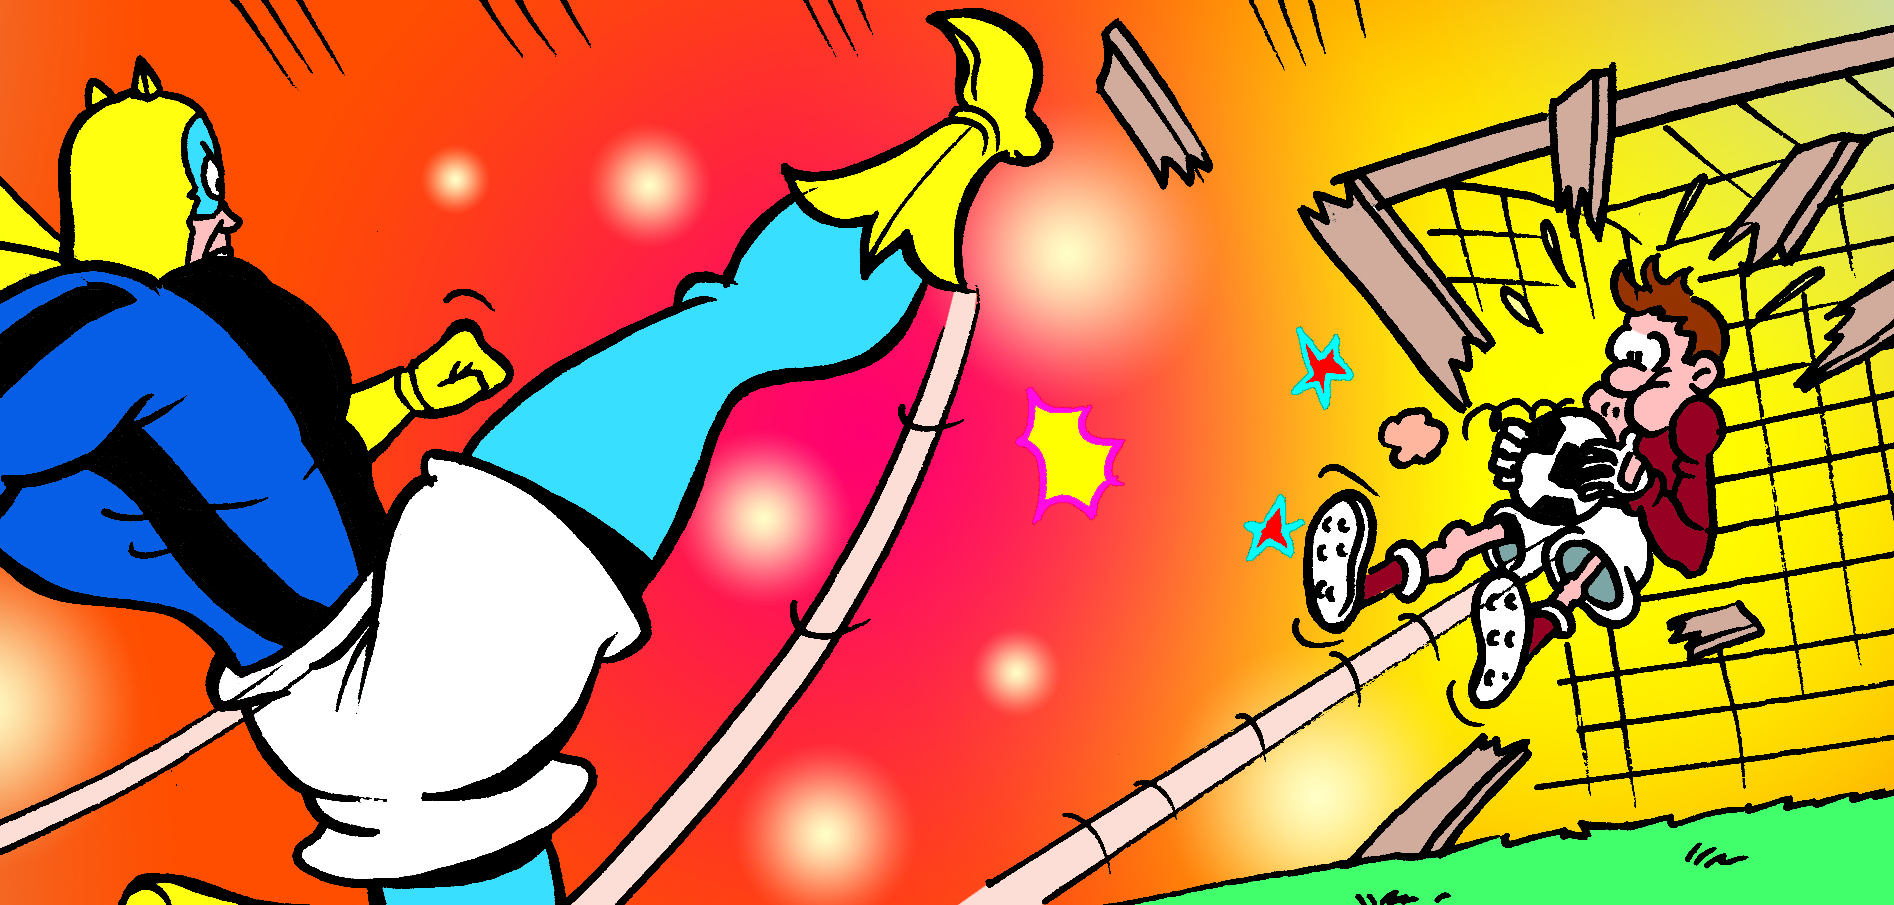 Which footie fanatic guest stars in Bananaman's strip this week?